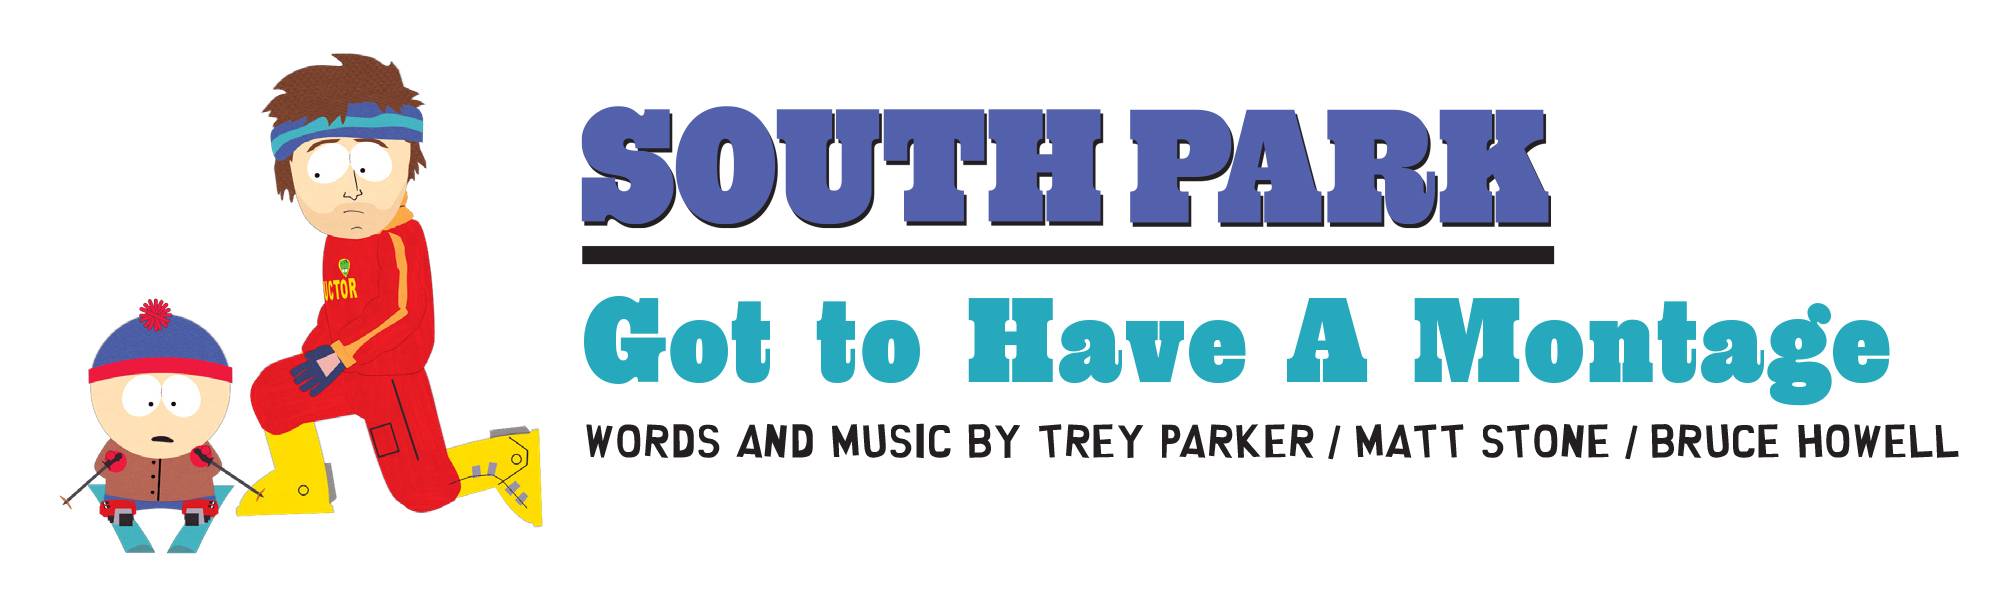 South Park on X: Enter for a chance to win the South Park 25th Anniversary  Concert Sweepstakes! One lucky fan will win two tickets to the South Park  25th Anniversary Concert at